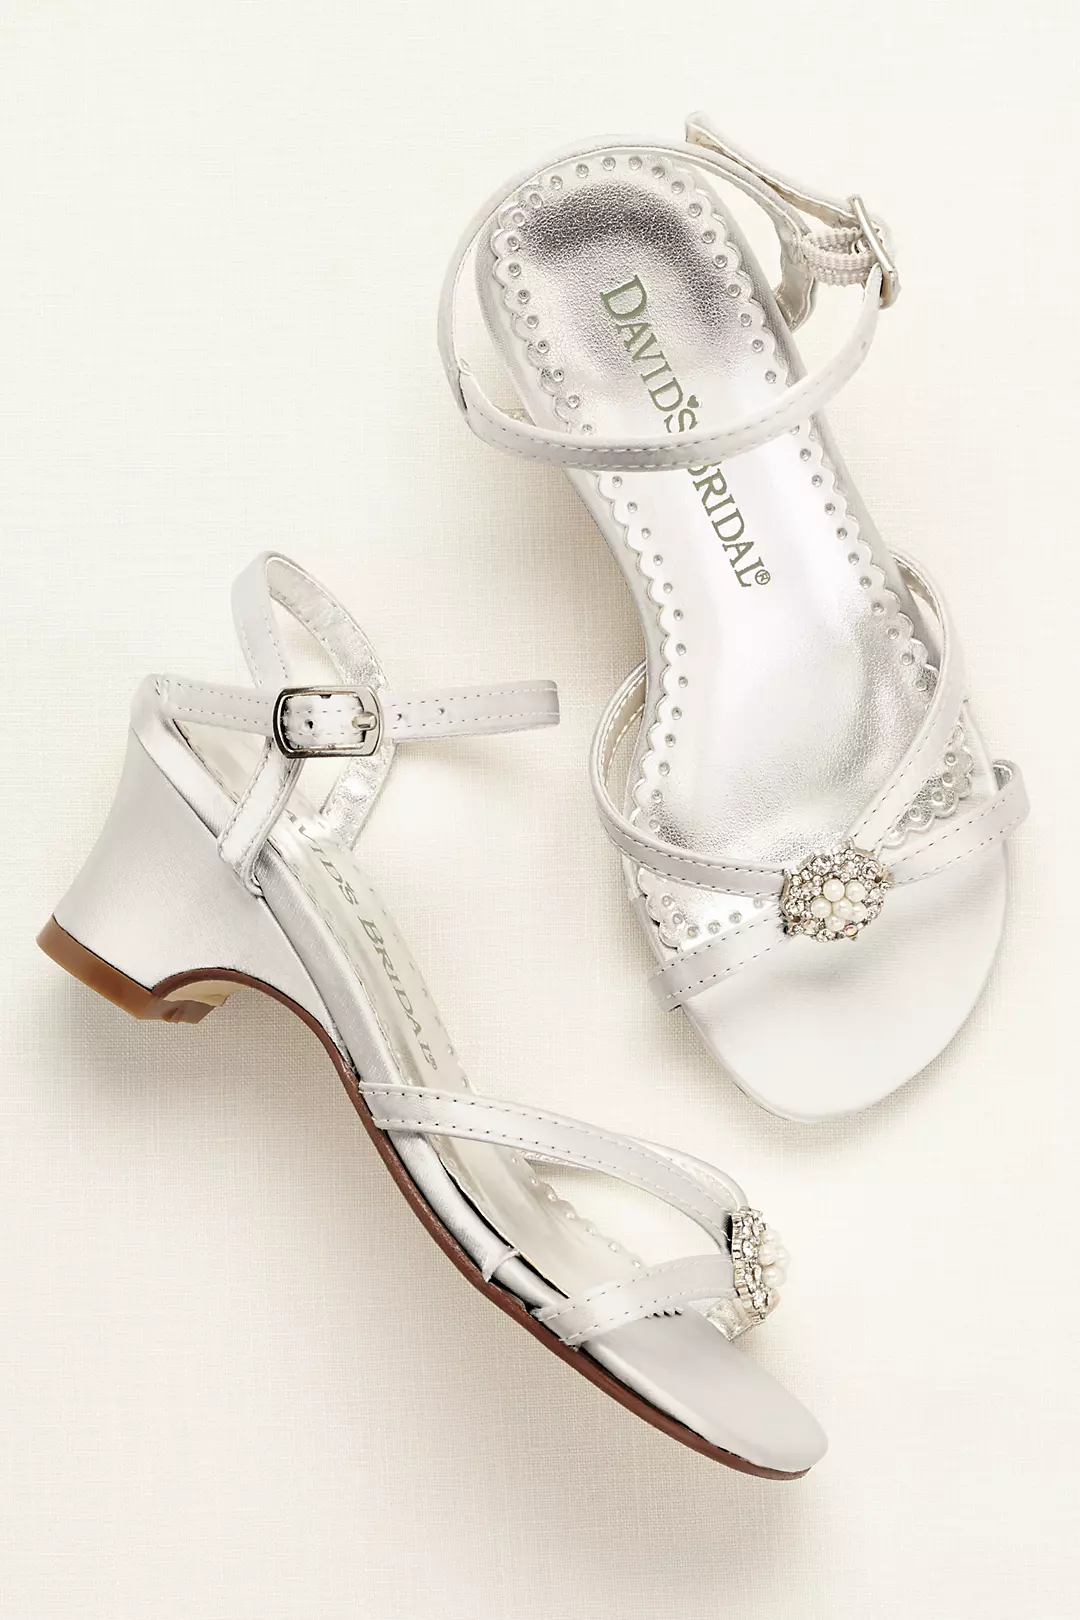 Dyeable Flower Girl Sandals with Pearl Ornament Image